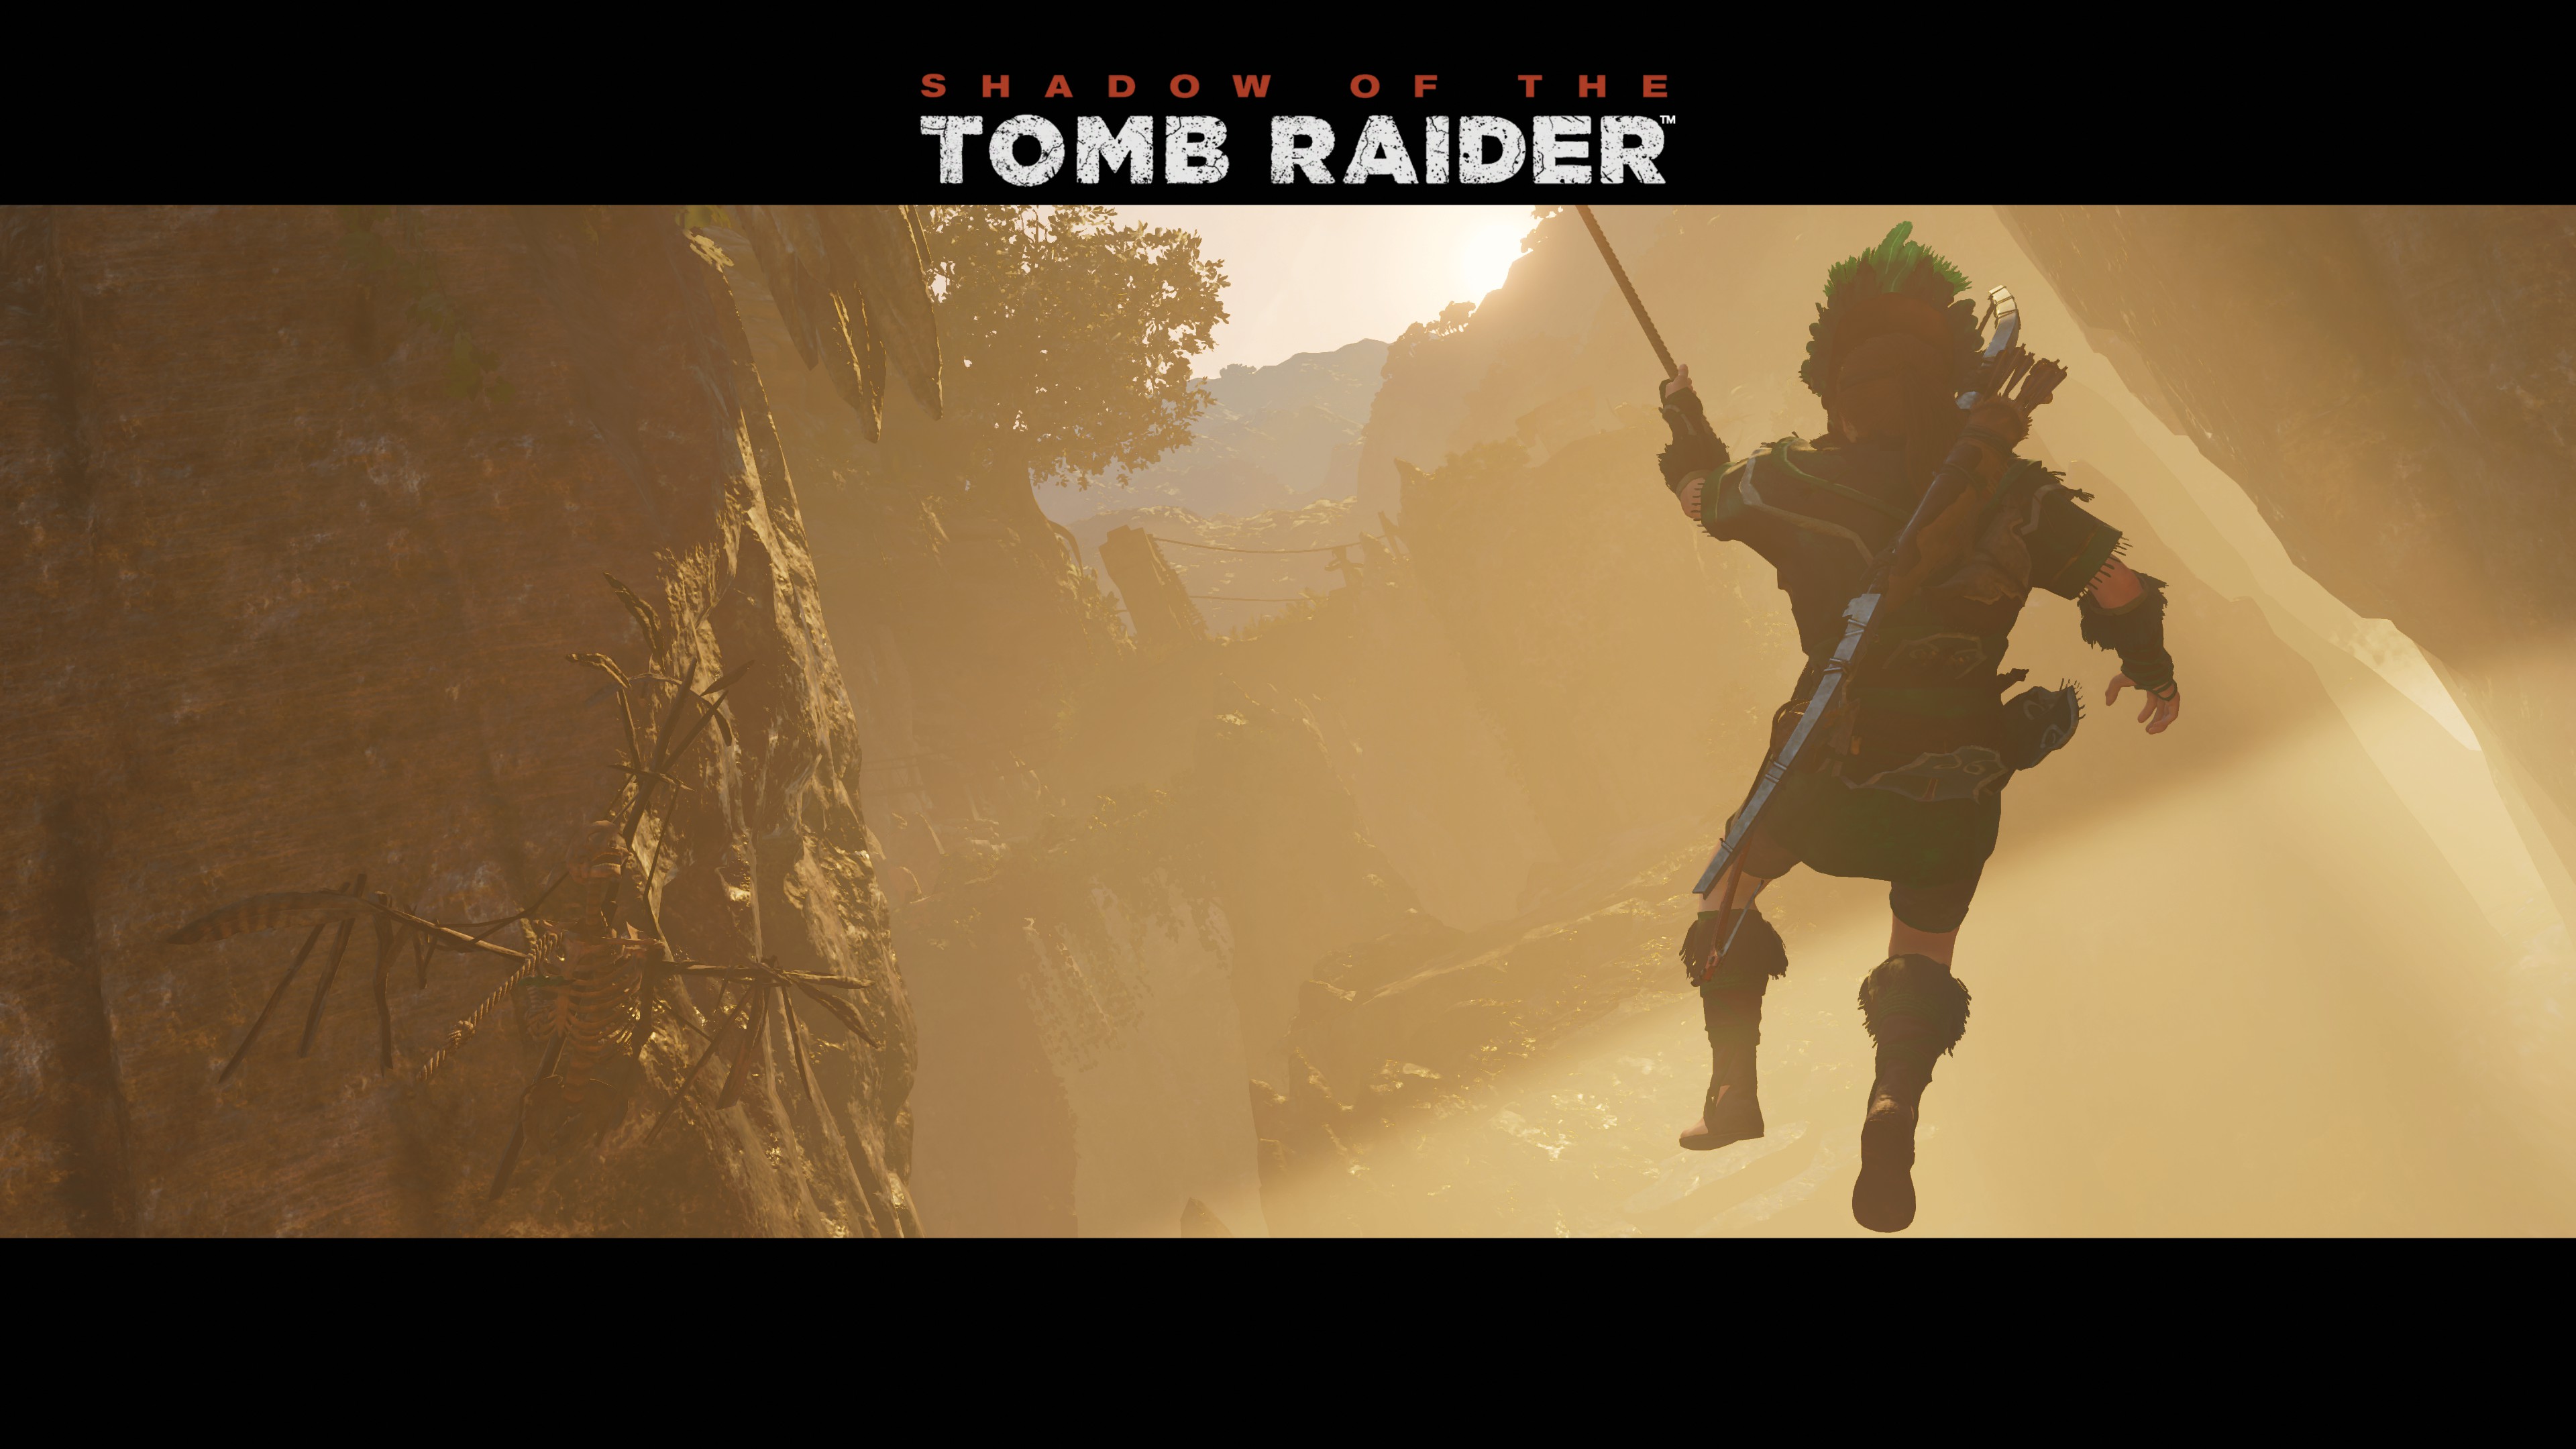 General 3840x2160 video games Tomb Raider Shadow of the Tomb Raider Lara Croft (Tomb Raider) PC gaming